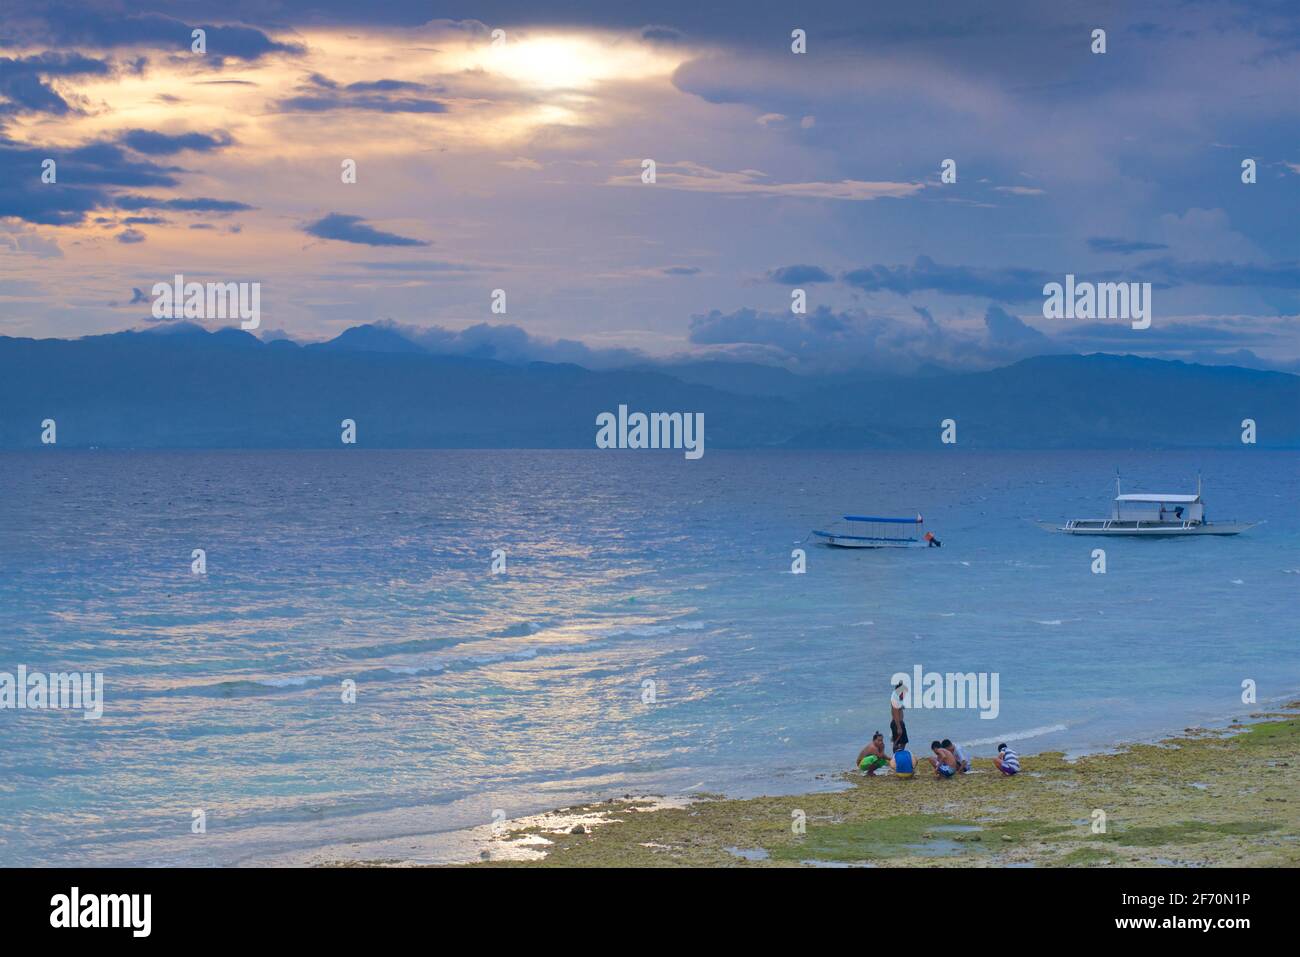 People collecting shellfish at low tide, Moalboal, Cebu, Central Visayas, Philippines Stock Photo